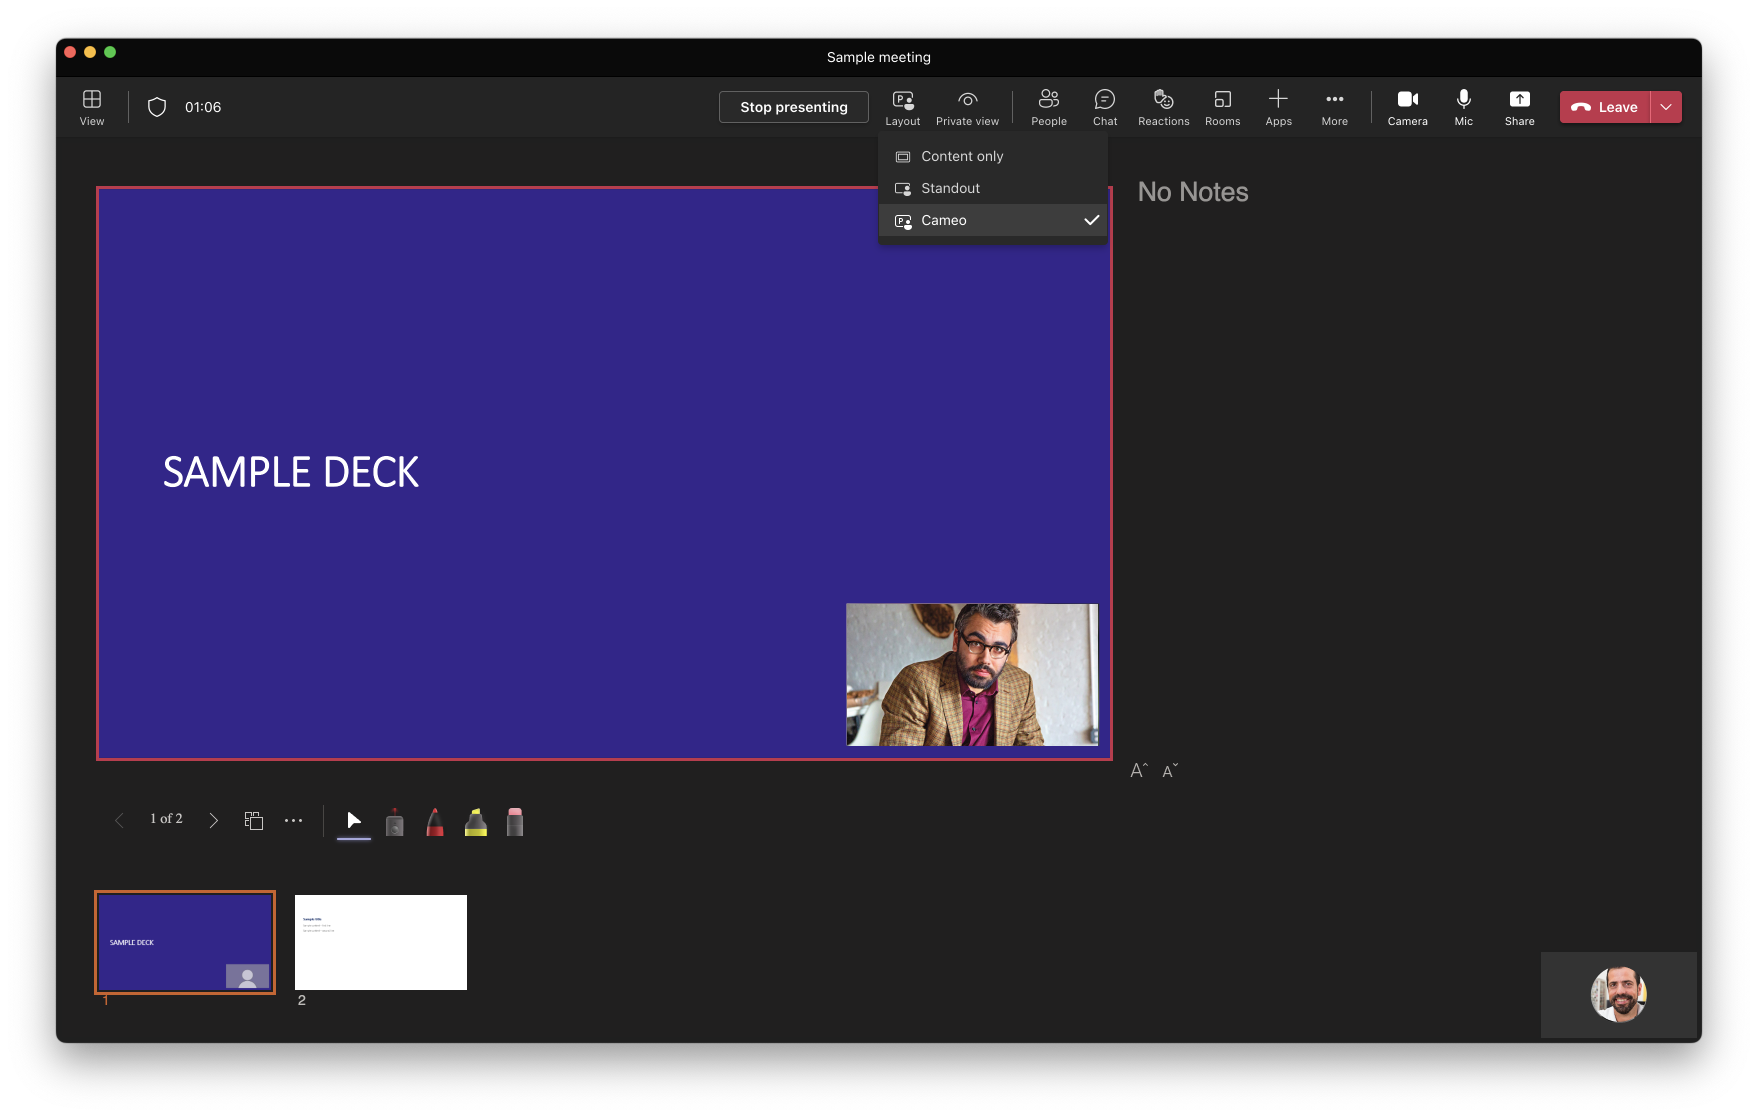 Once joined in Teams meeting, users will be able to share PowerPoint Live and see their video integrated into slides.